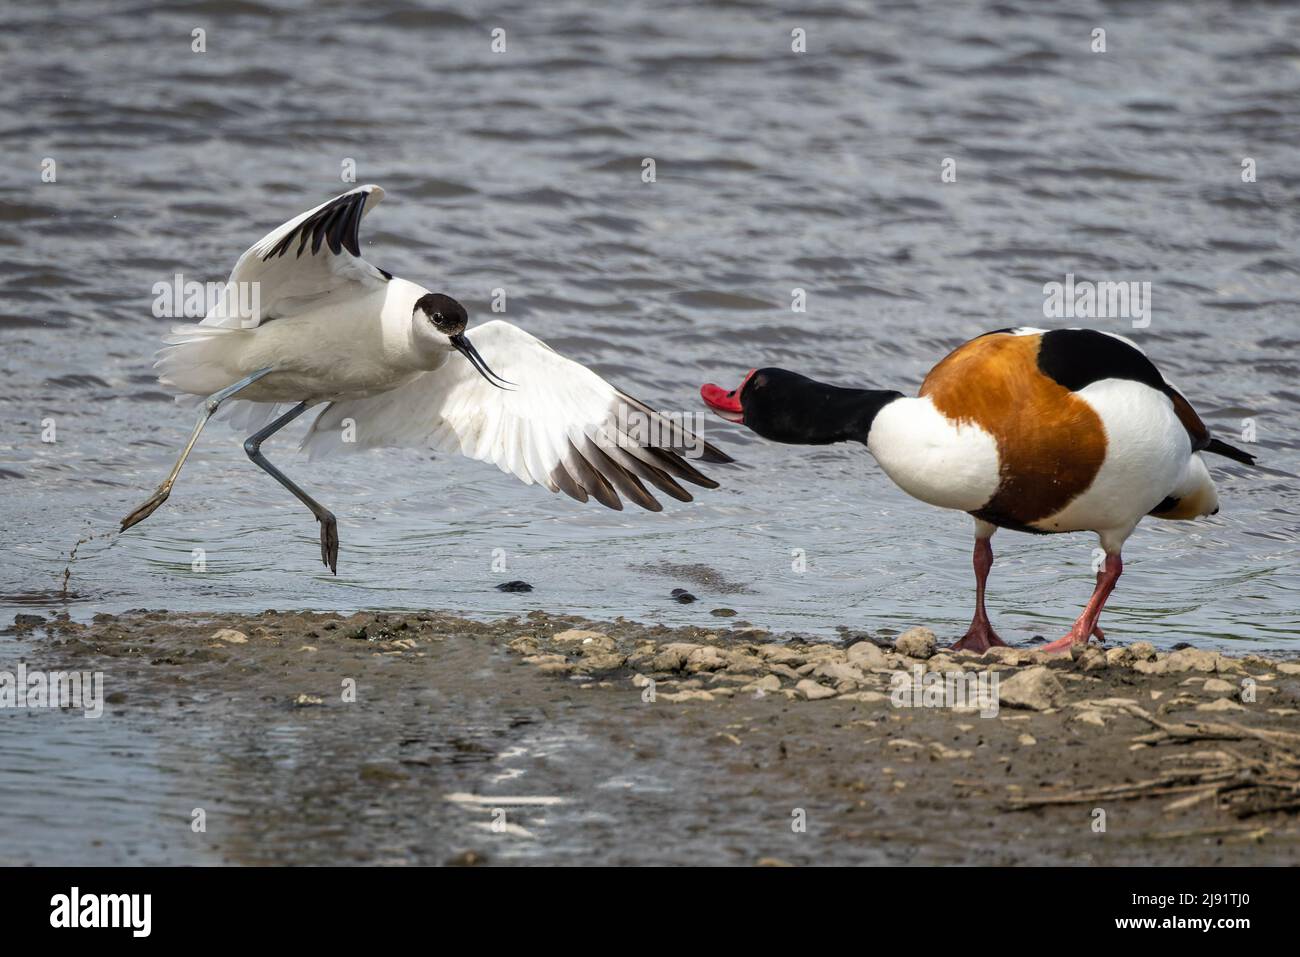 Close up of an Avocet and a Shelduck confronting oneanother on an Estuary mudflats, Stock Photo